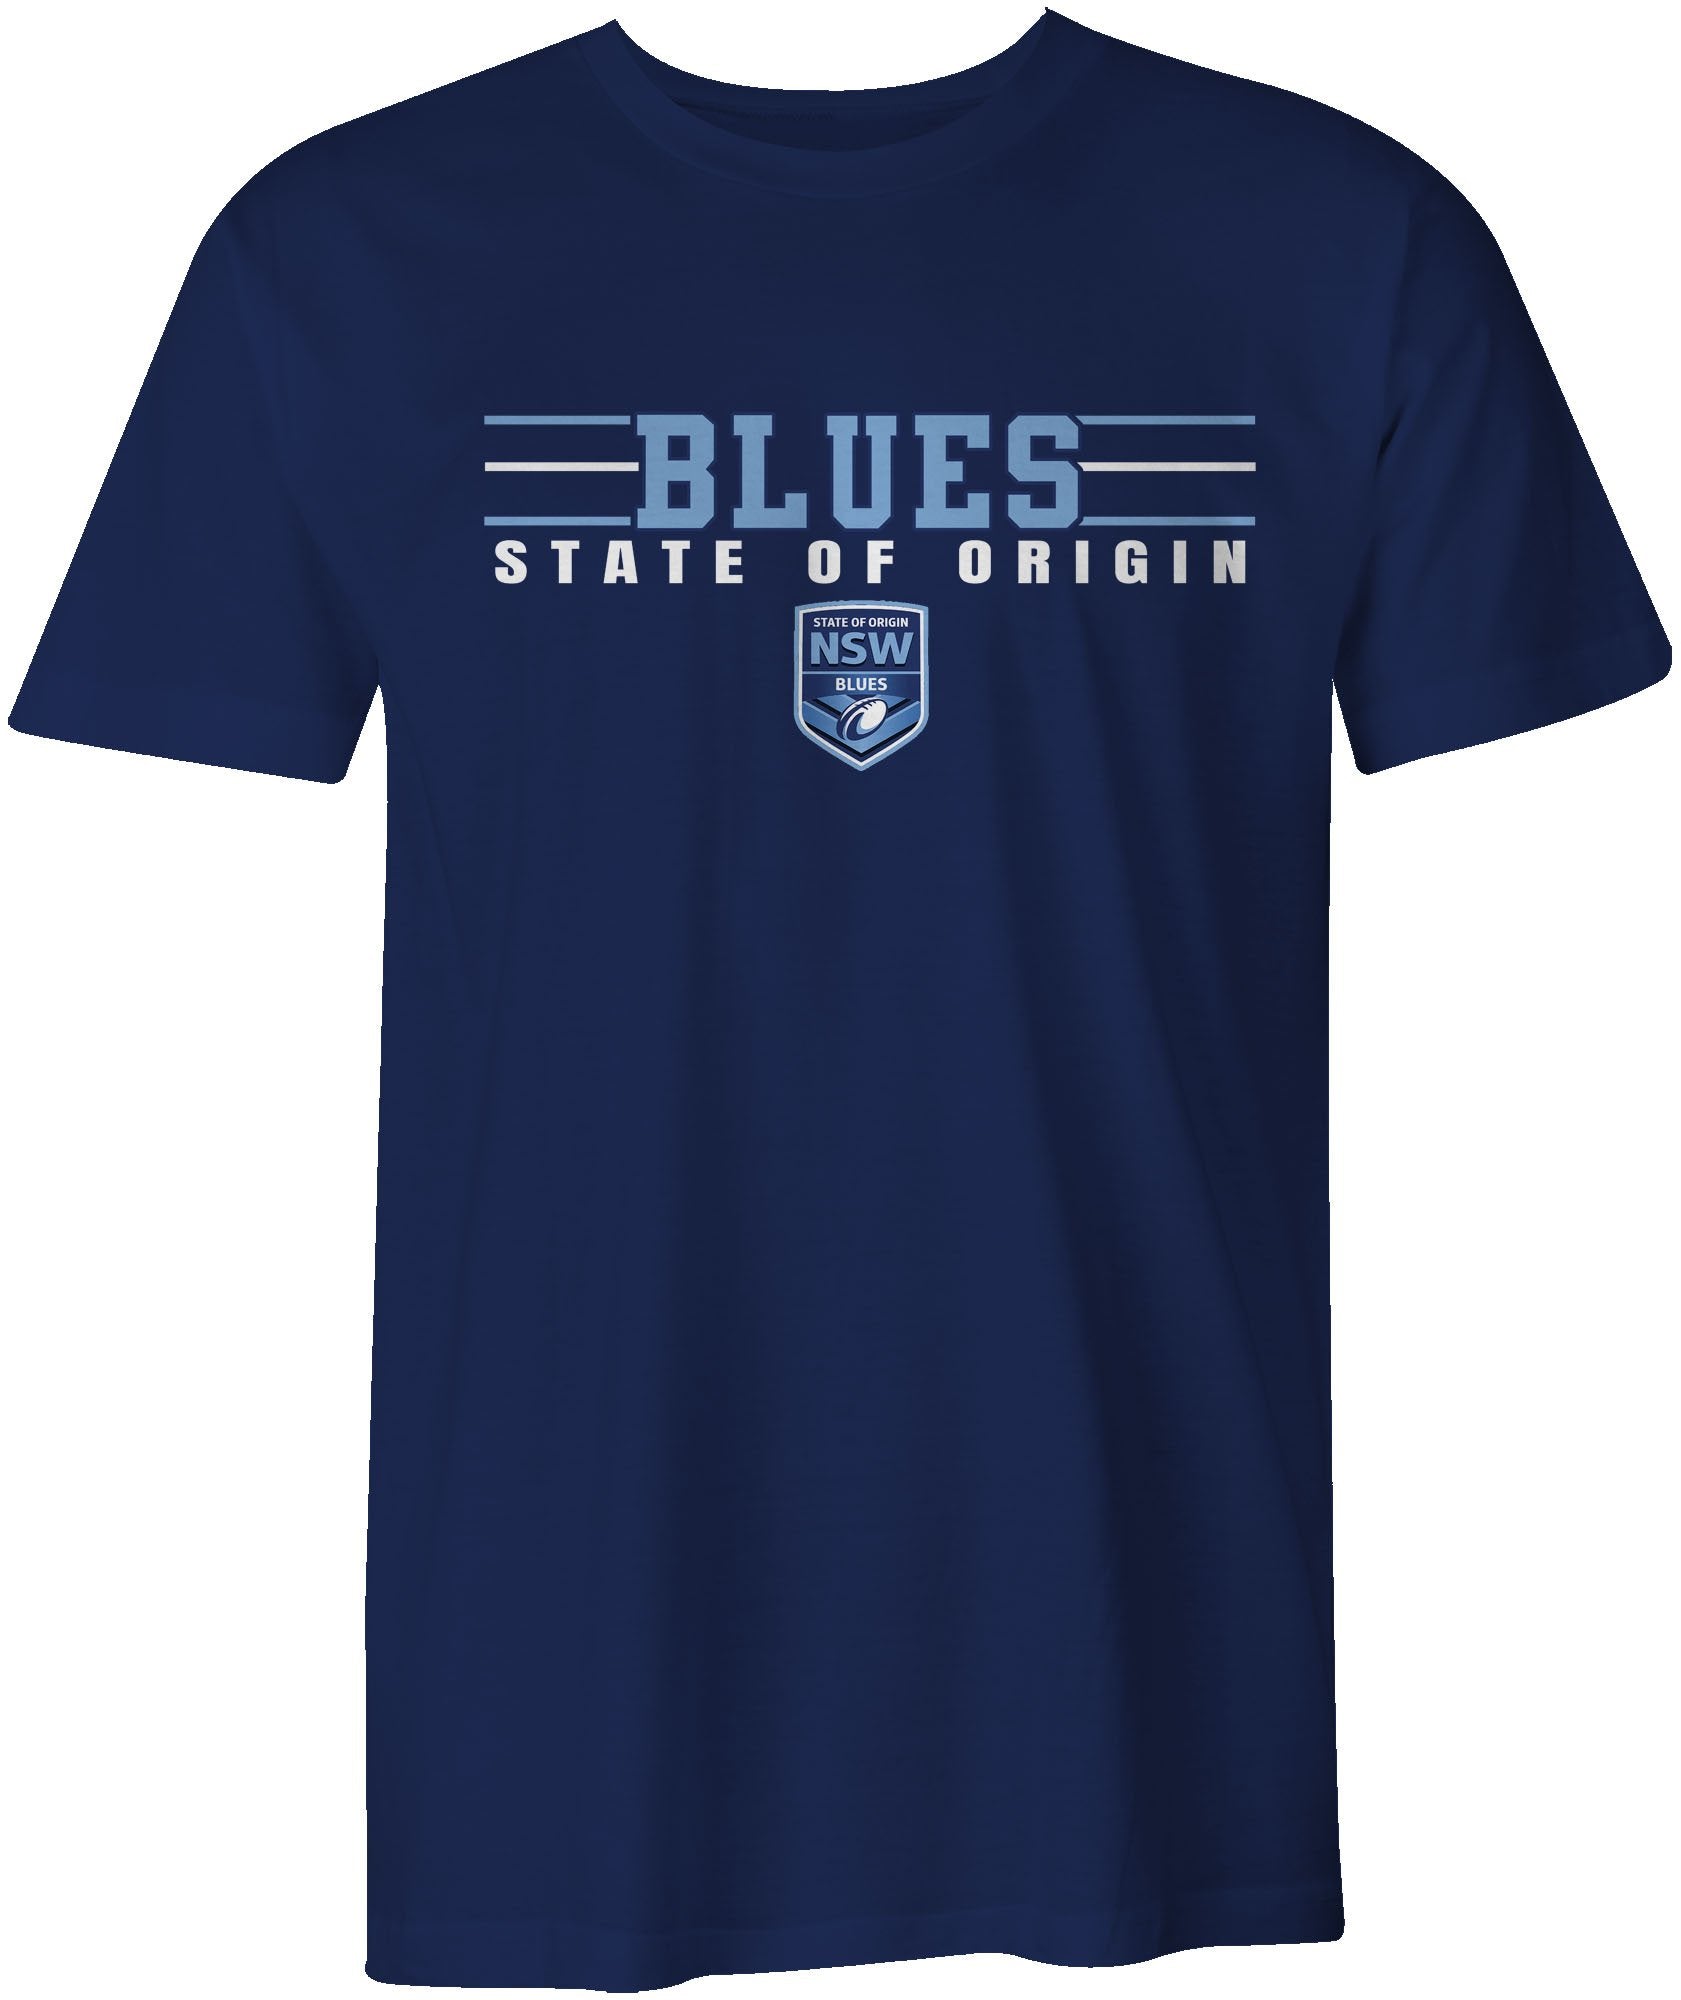 State Of Origin NSW Blue T-Shirt freeshipping - DTF Print Store